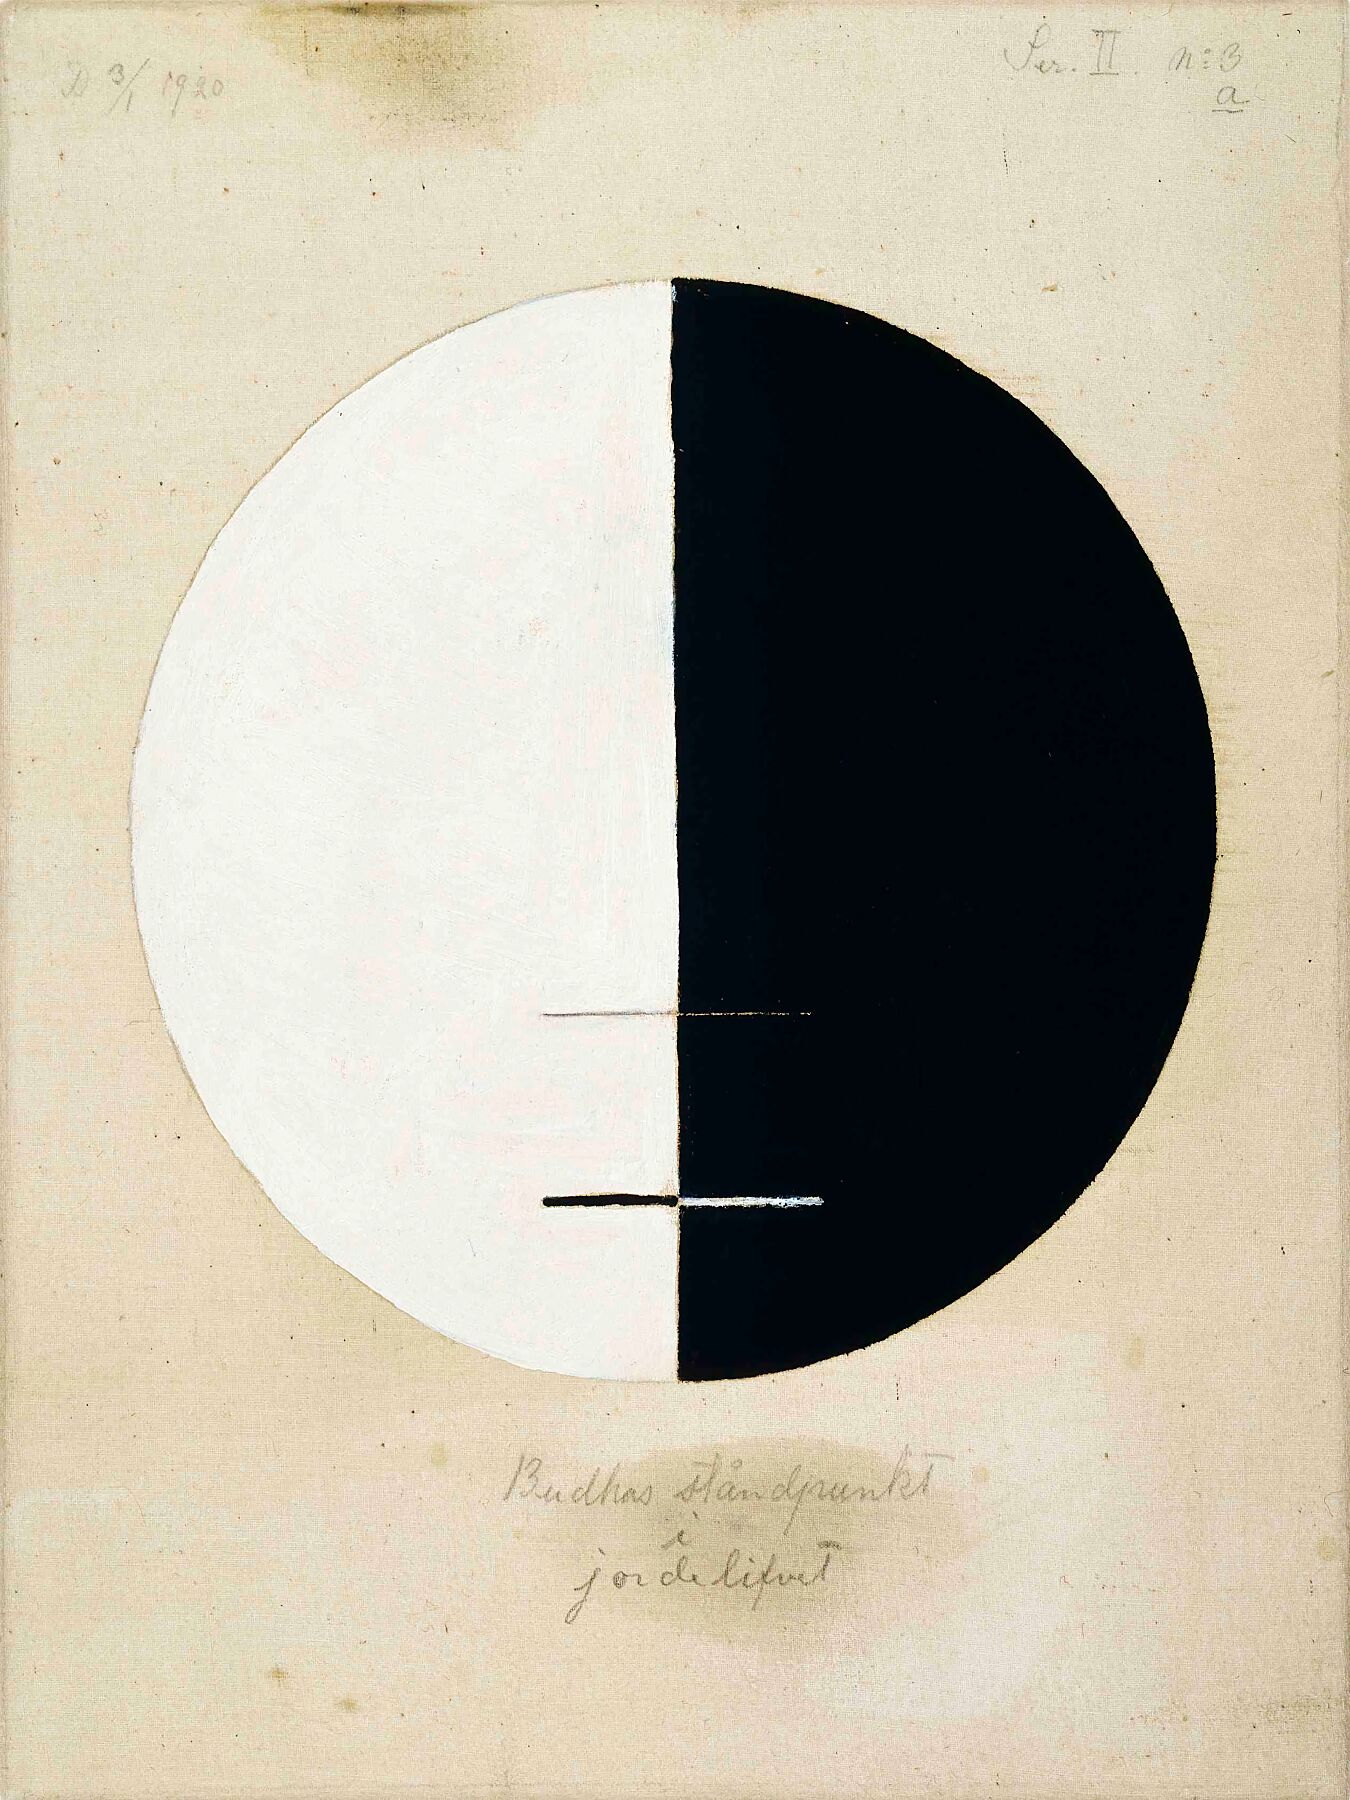 Buddha’s Standpoint in the Earthly Life No. 3a by Hilma af Klint - 1920